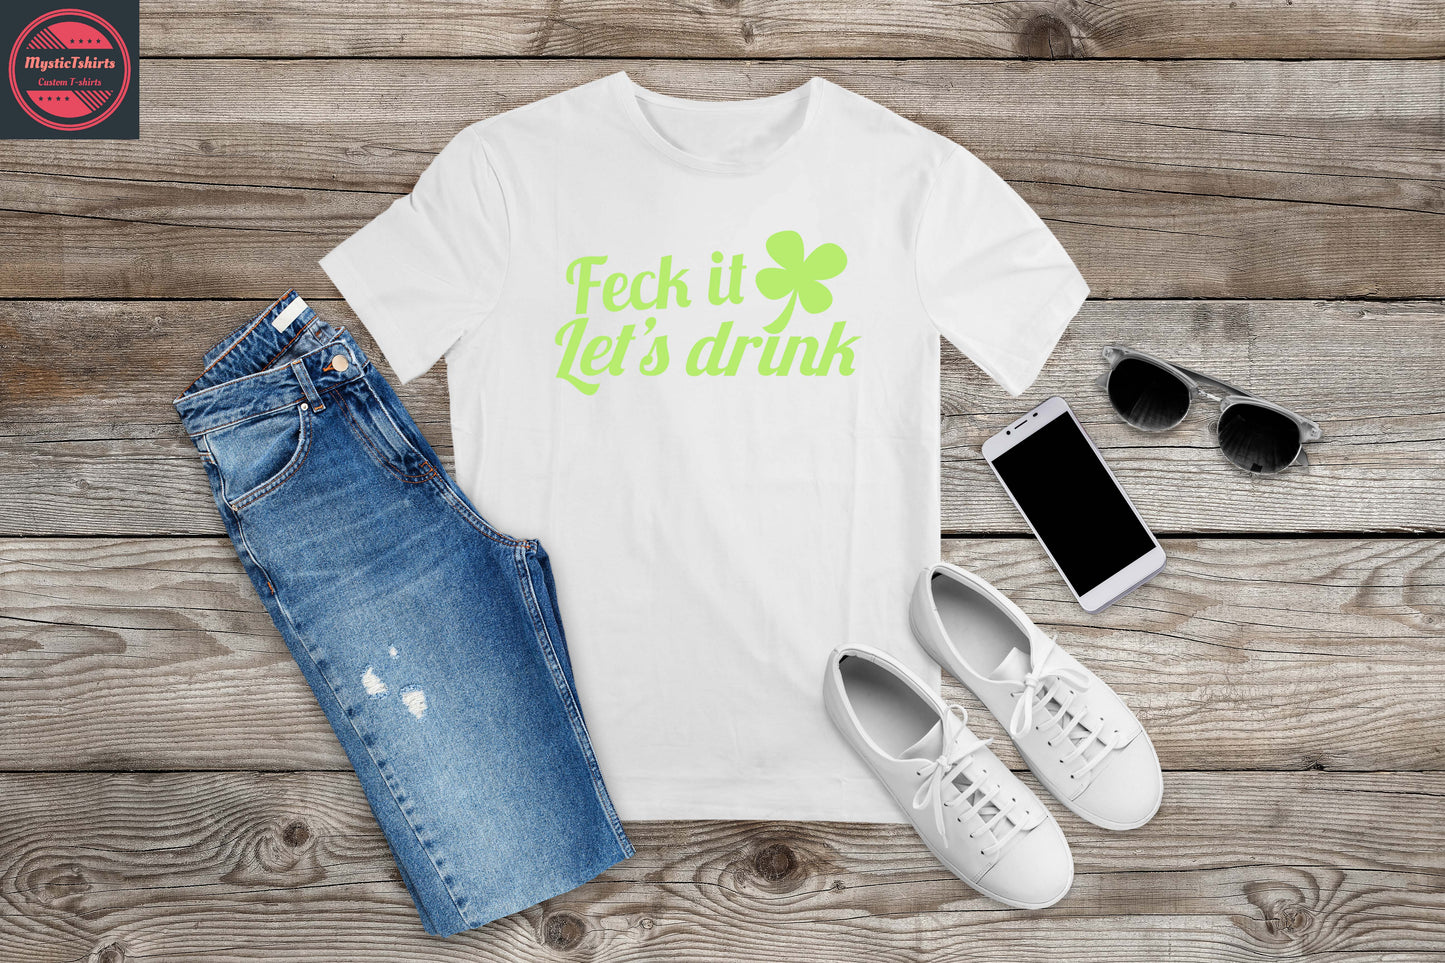 145. FECK IT LET'S DRINK, Custom Made Shirt, Personalized T-Shirt, Custom Text, Make Your Own Shirt, Custom Tee